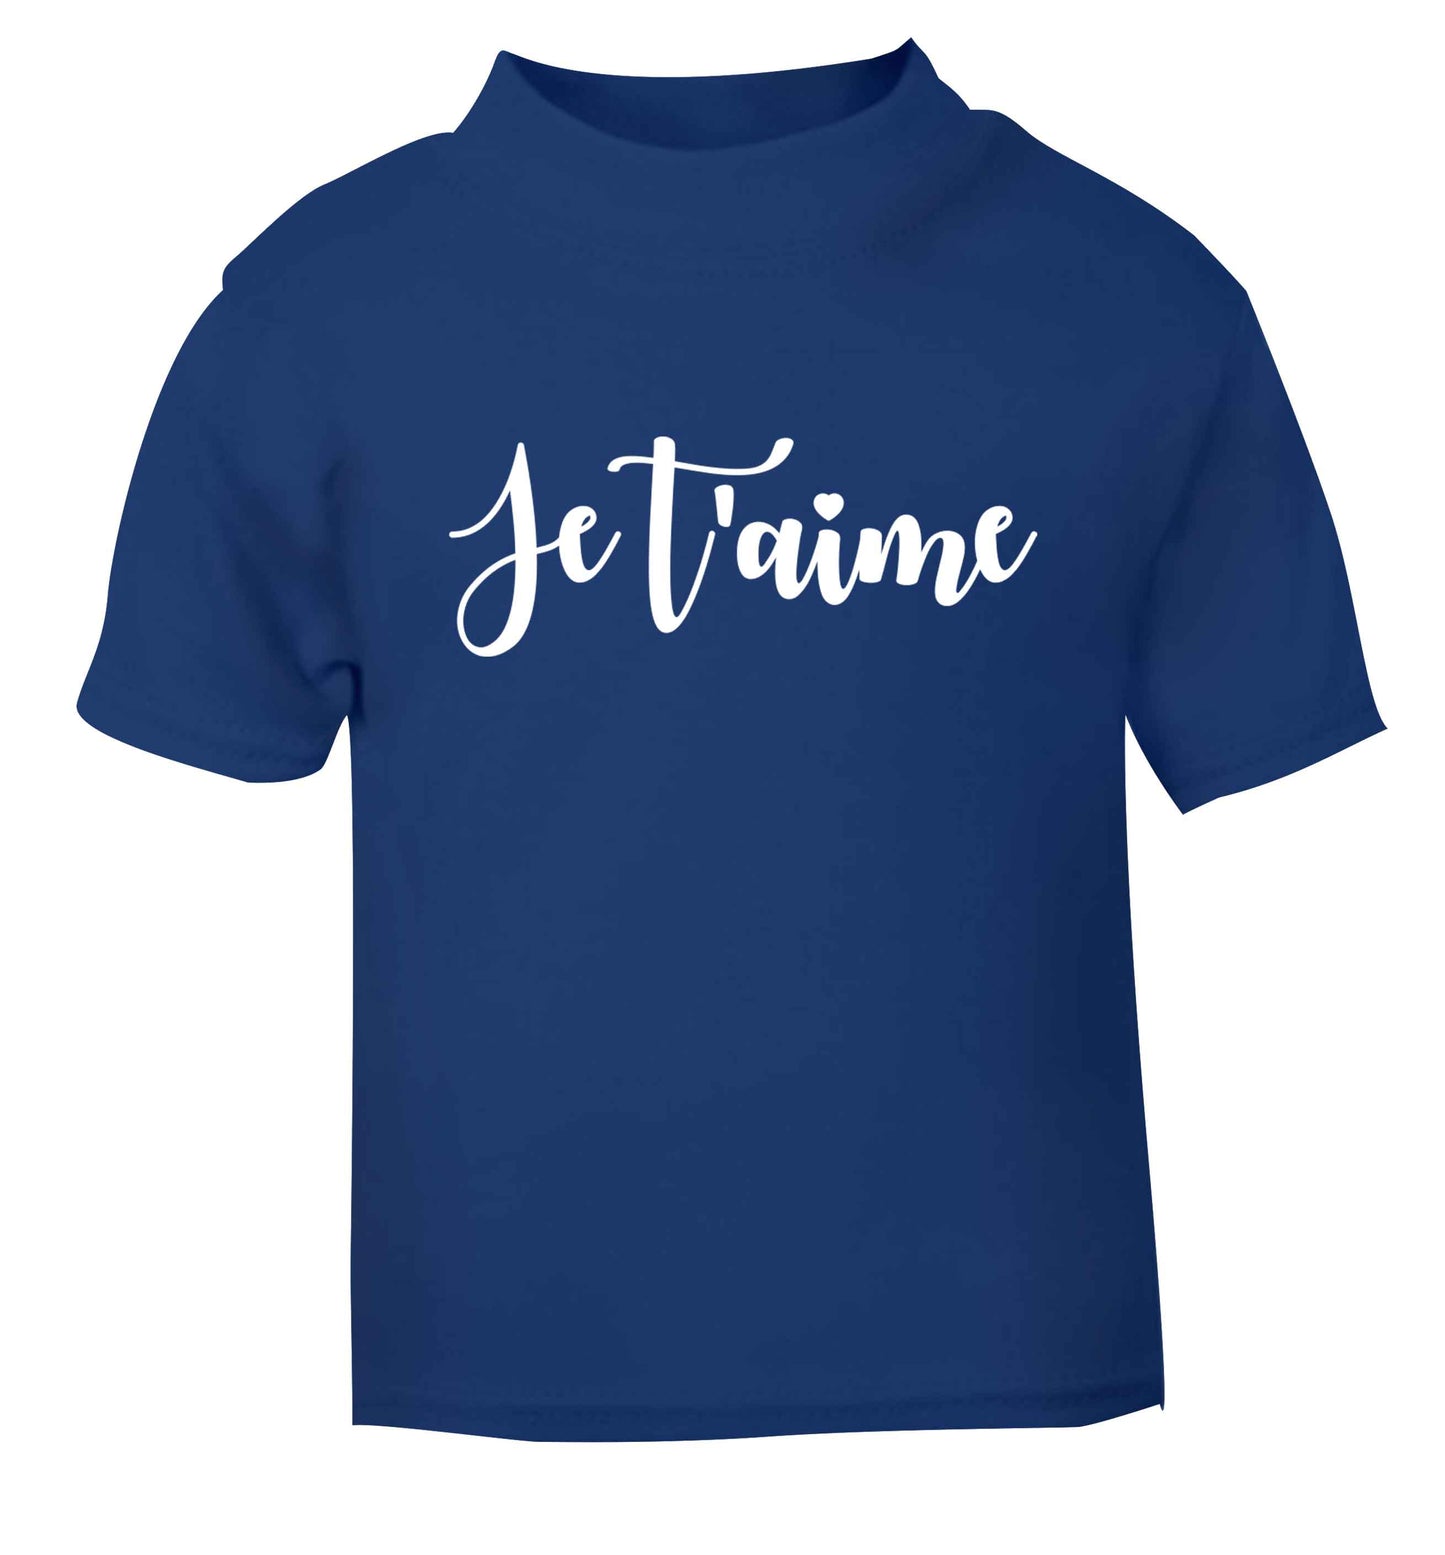 Je t'aime blue baby toddler Tshirt 2 Years